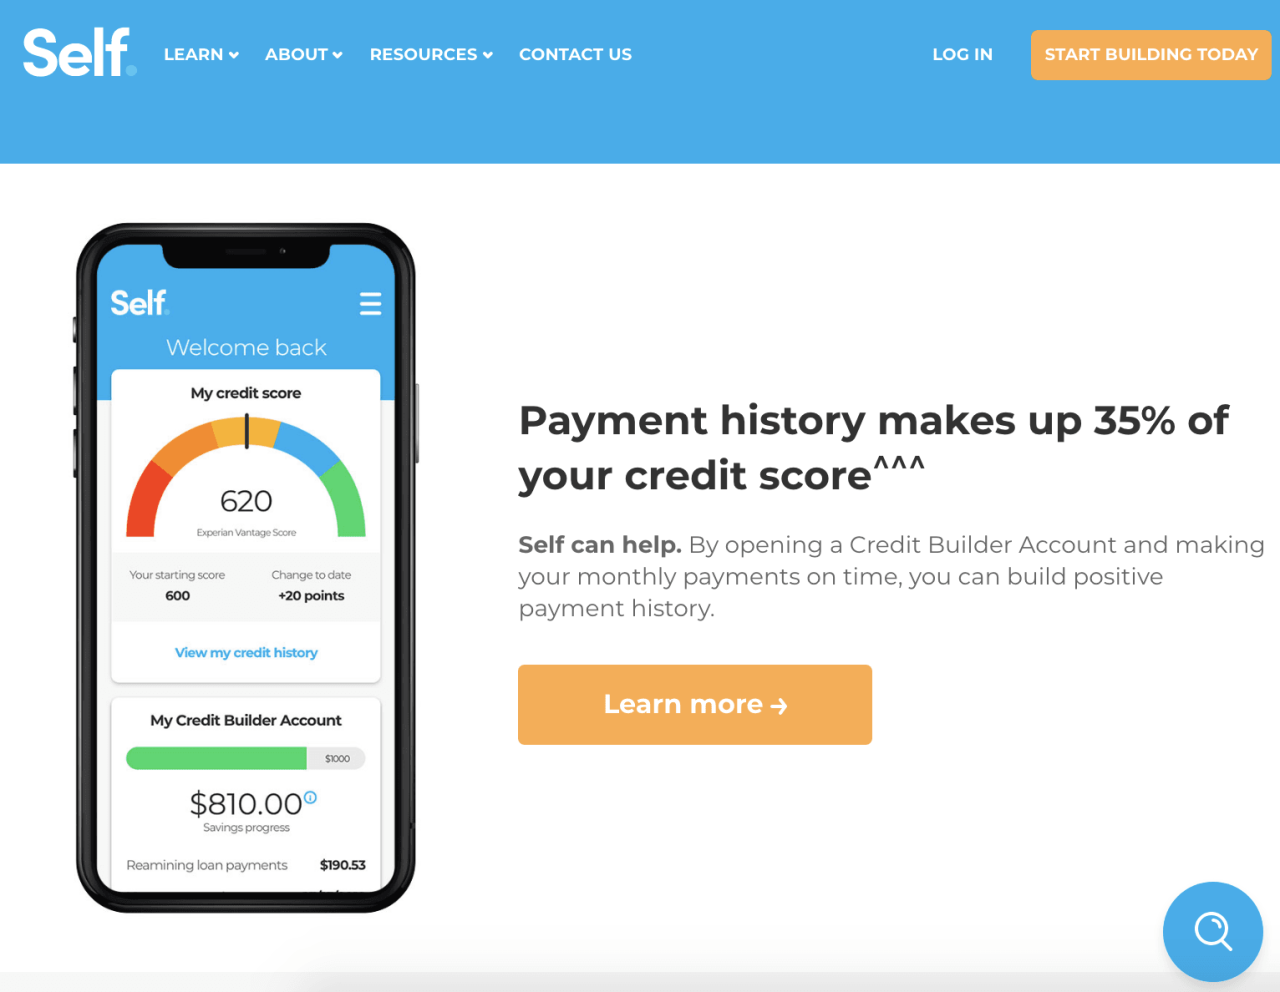 Self Review: Building Credit While Saving Money - Visually appealing interface